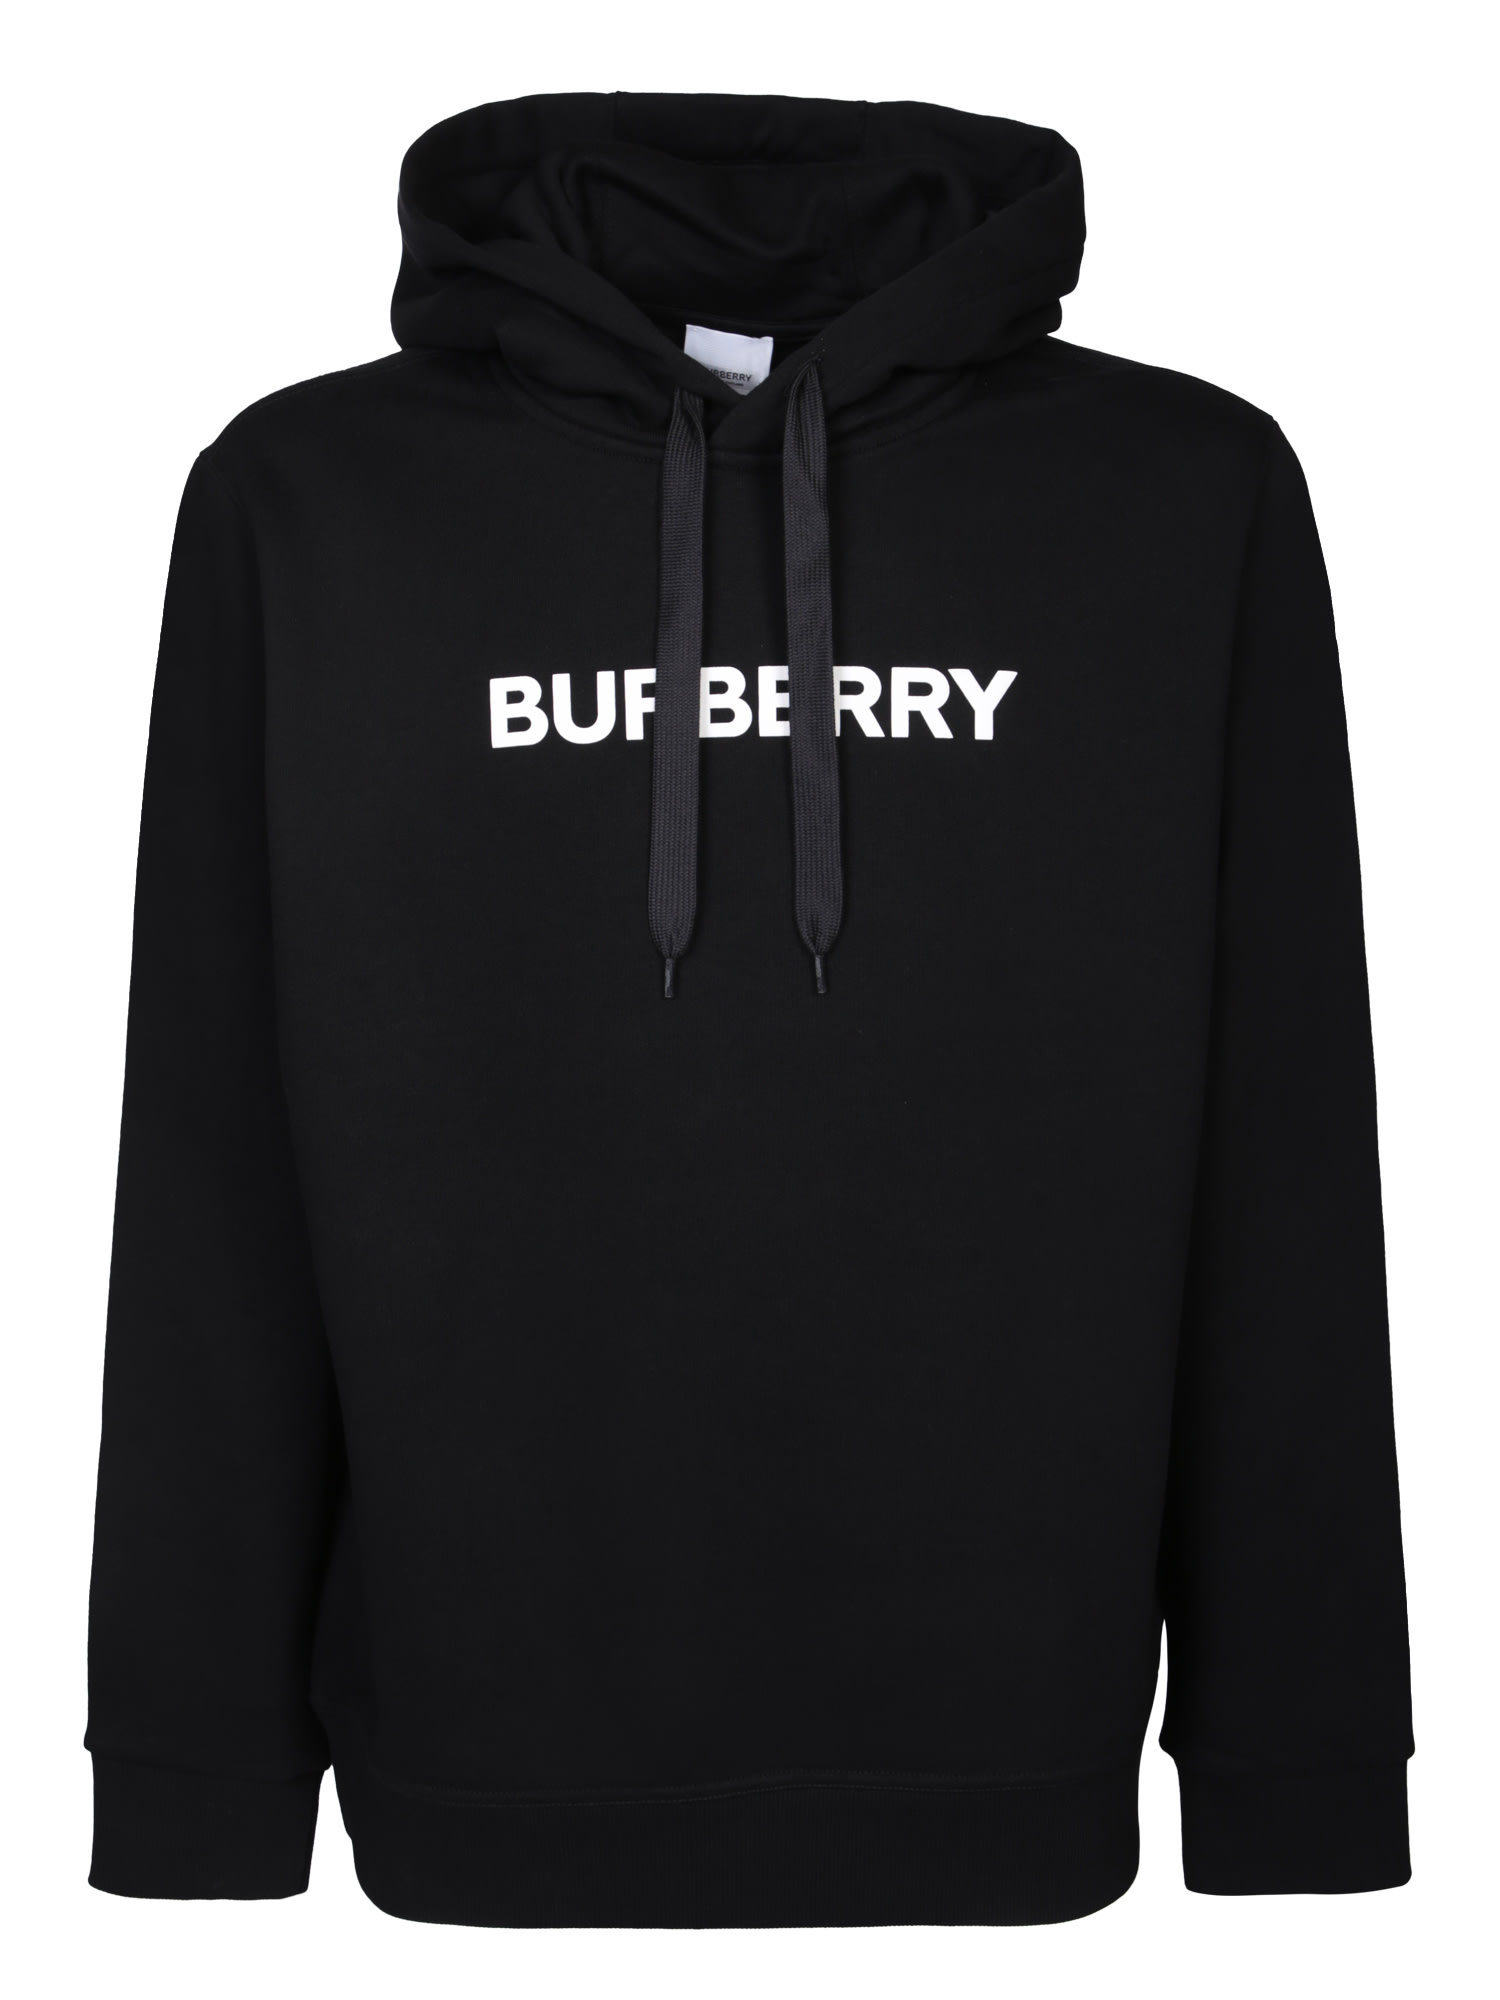 Shop Burberry This  Hoodie Boasts A Casual Aesthetic Making It A Musthave In Black